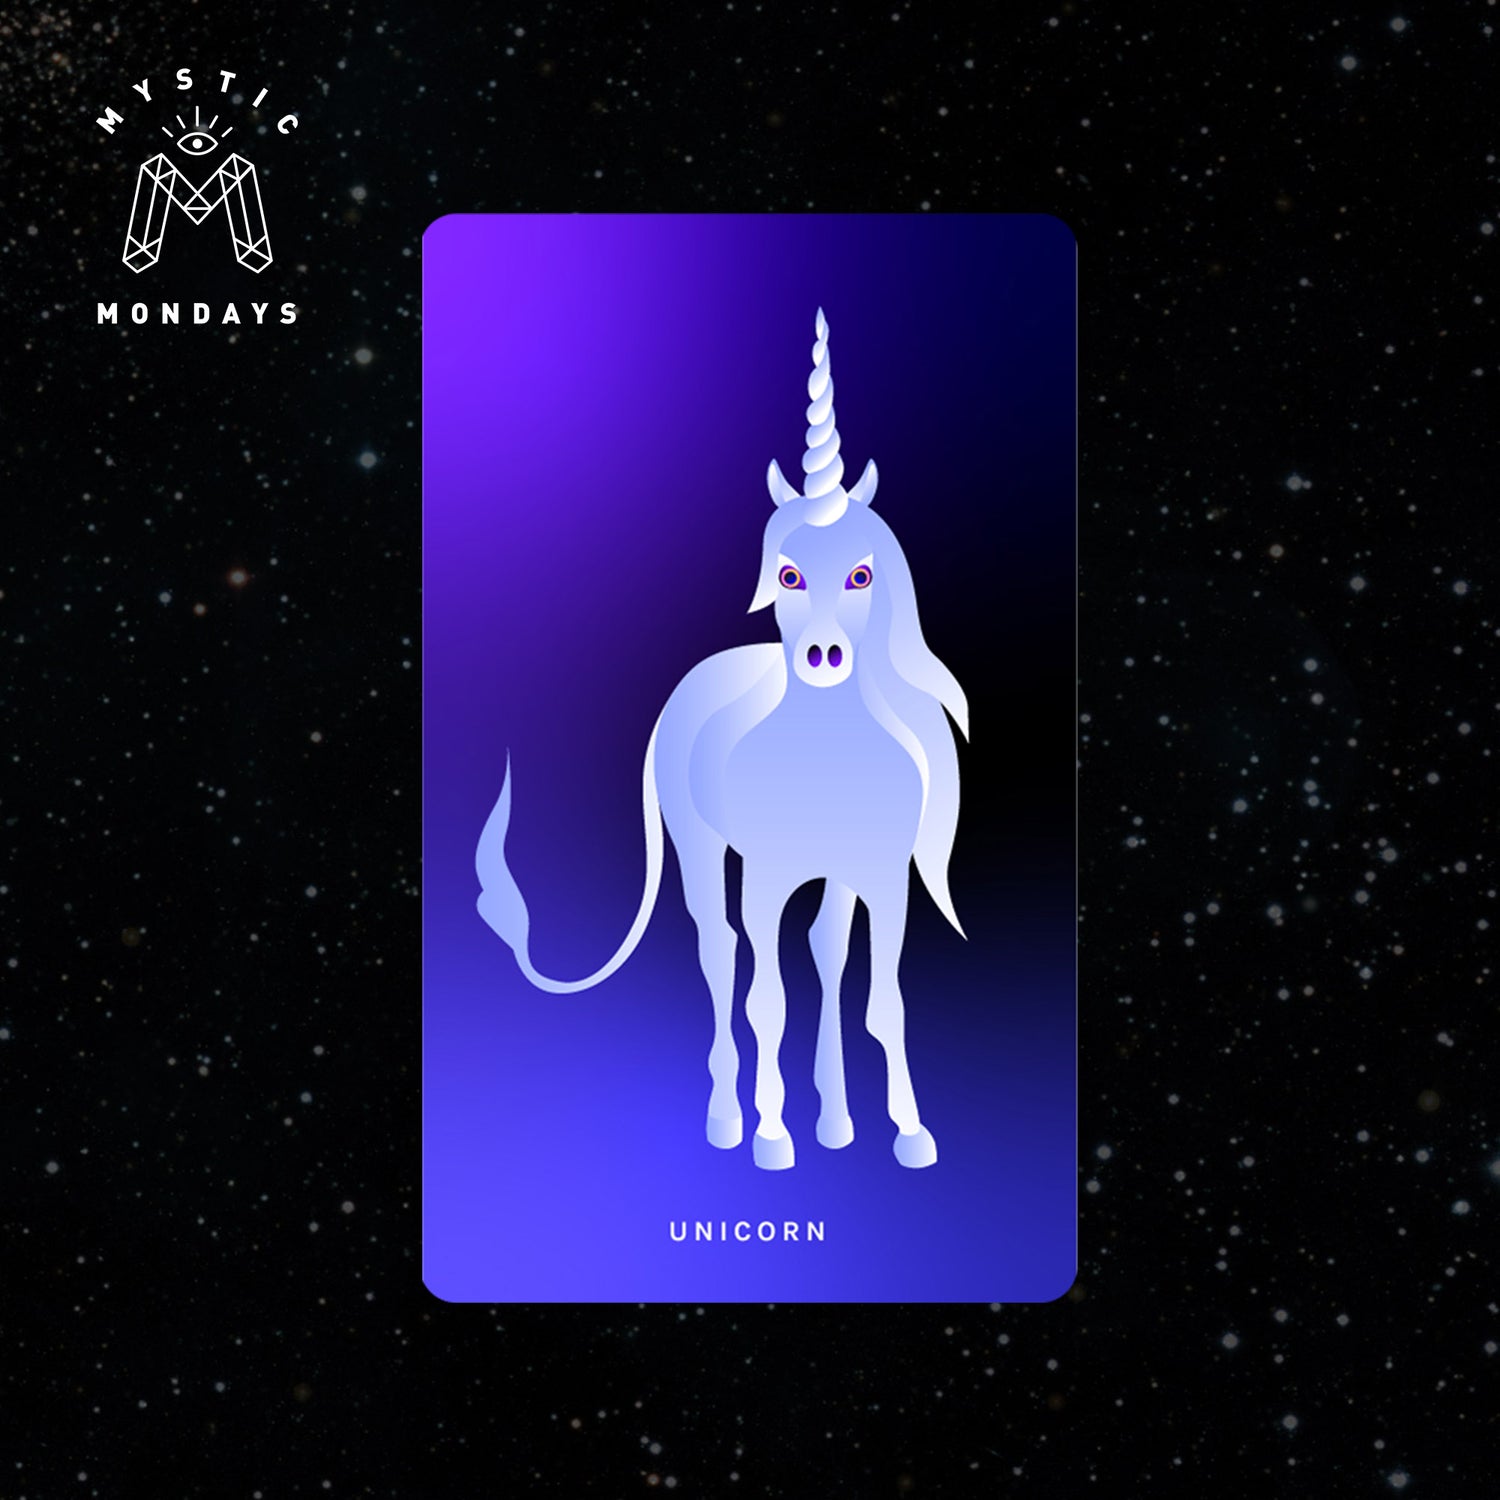 Unicorn Cosmic Creatures Card Cheat Sheet Reference Guide